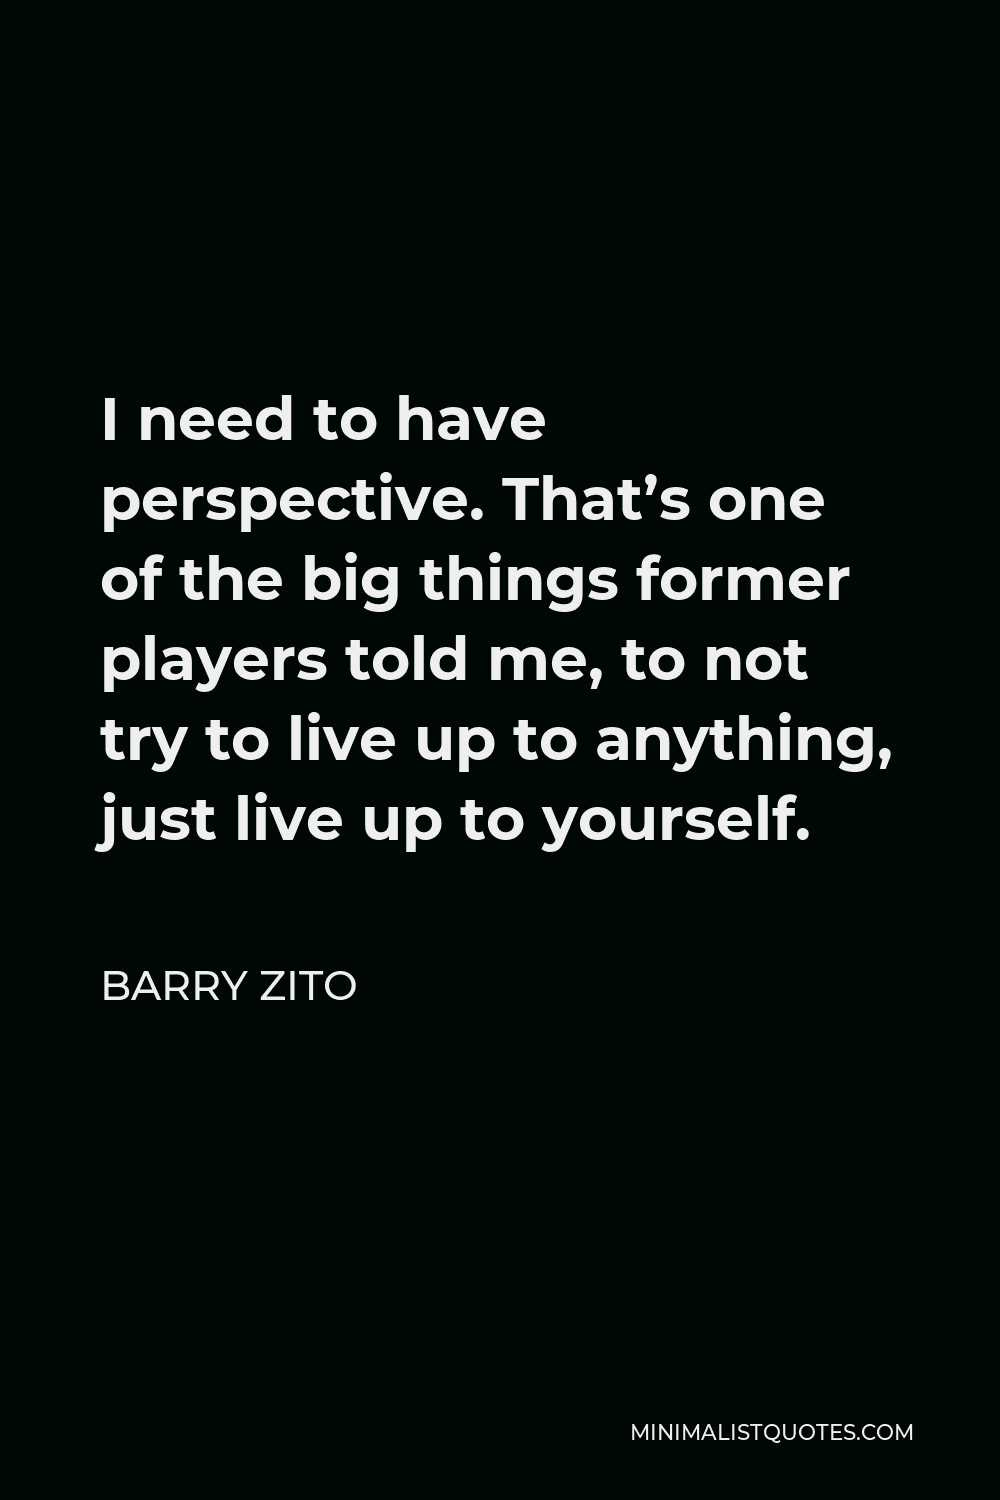 Barry Zito Quote - I need to have perspective. That’s one of the big things former players told me, to not try to live up to anything, just live up to yourself.